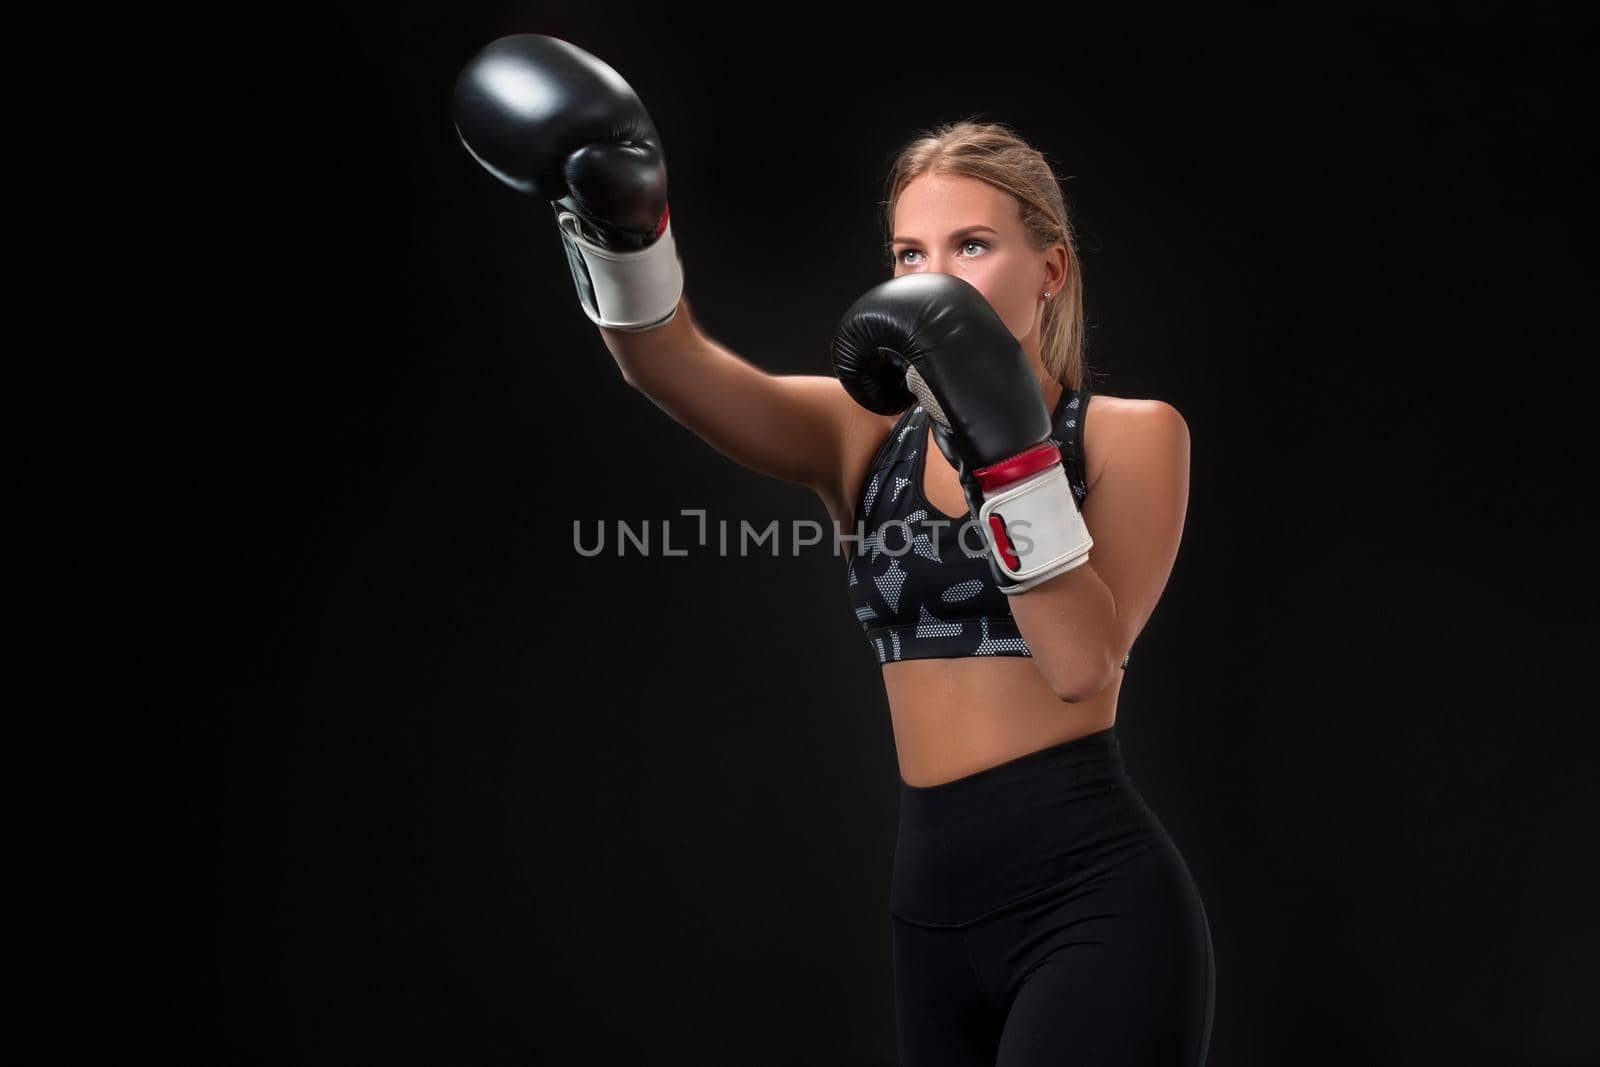 Beautiful female athlete in boxing gloves, in the studio on a black background. The boxer fulfills the blow